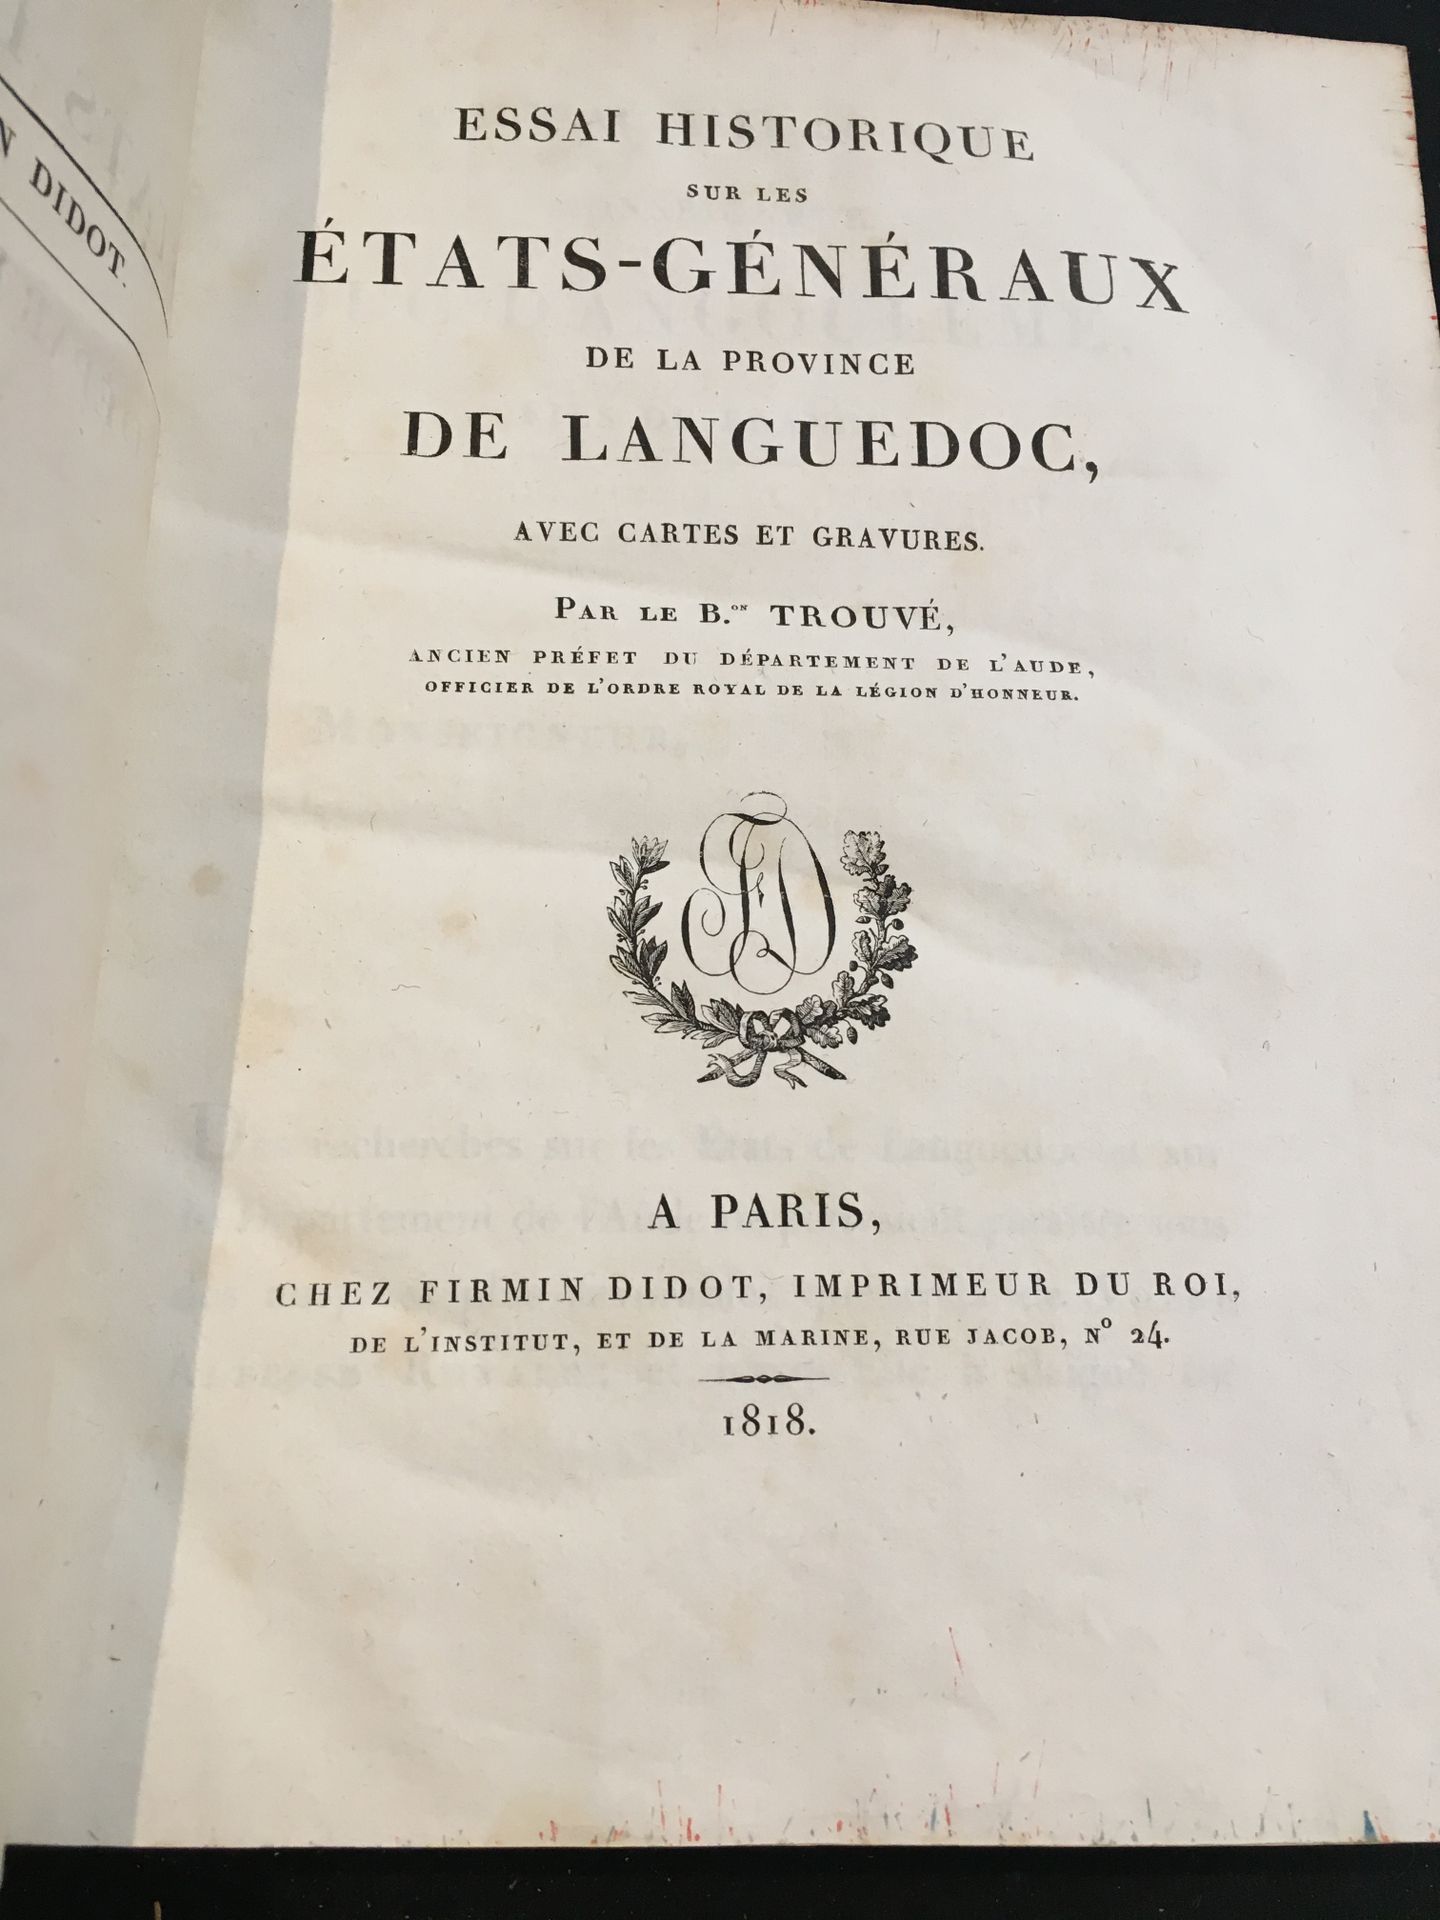 Null LANGUEDOC (States of)]. TROUVÉ (Baron). - Historical essay on the Estates-G&hellip;